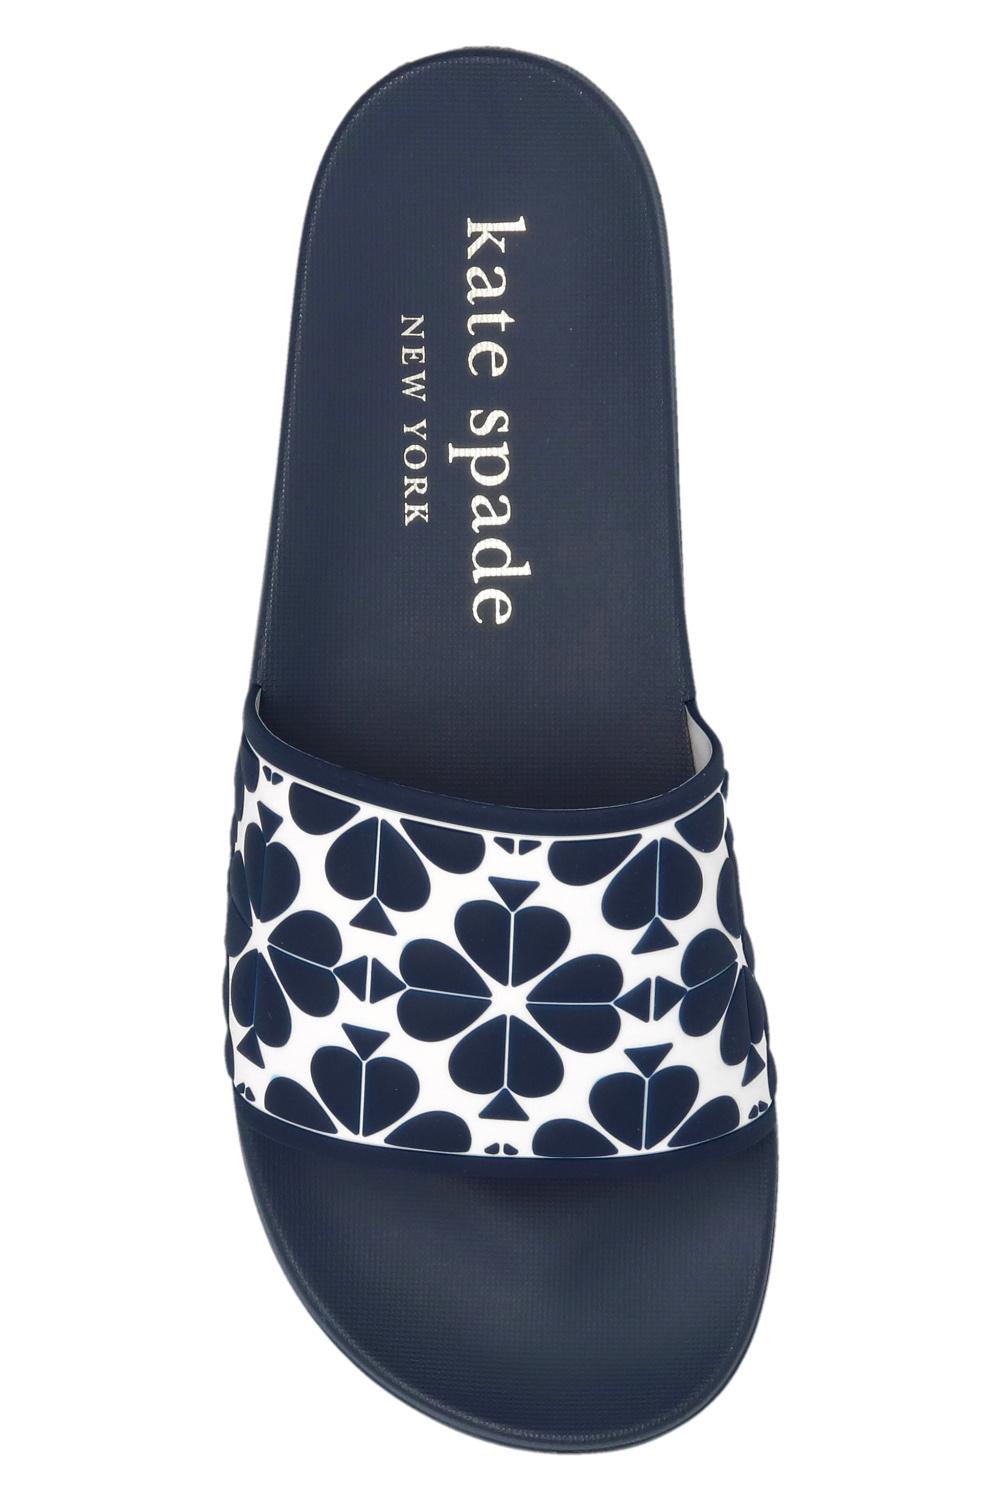 Kate Spade Rubber 'olympia' Slides in Navy Blue (Blue) | Lyst